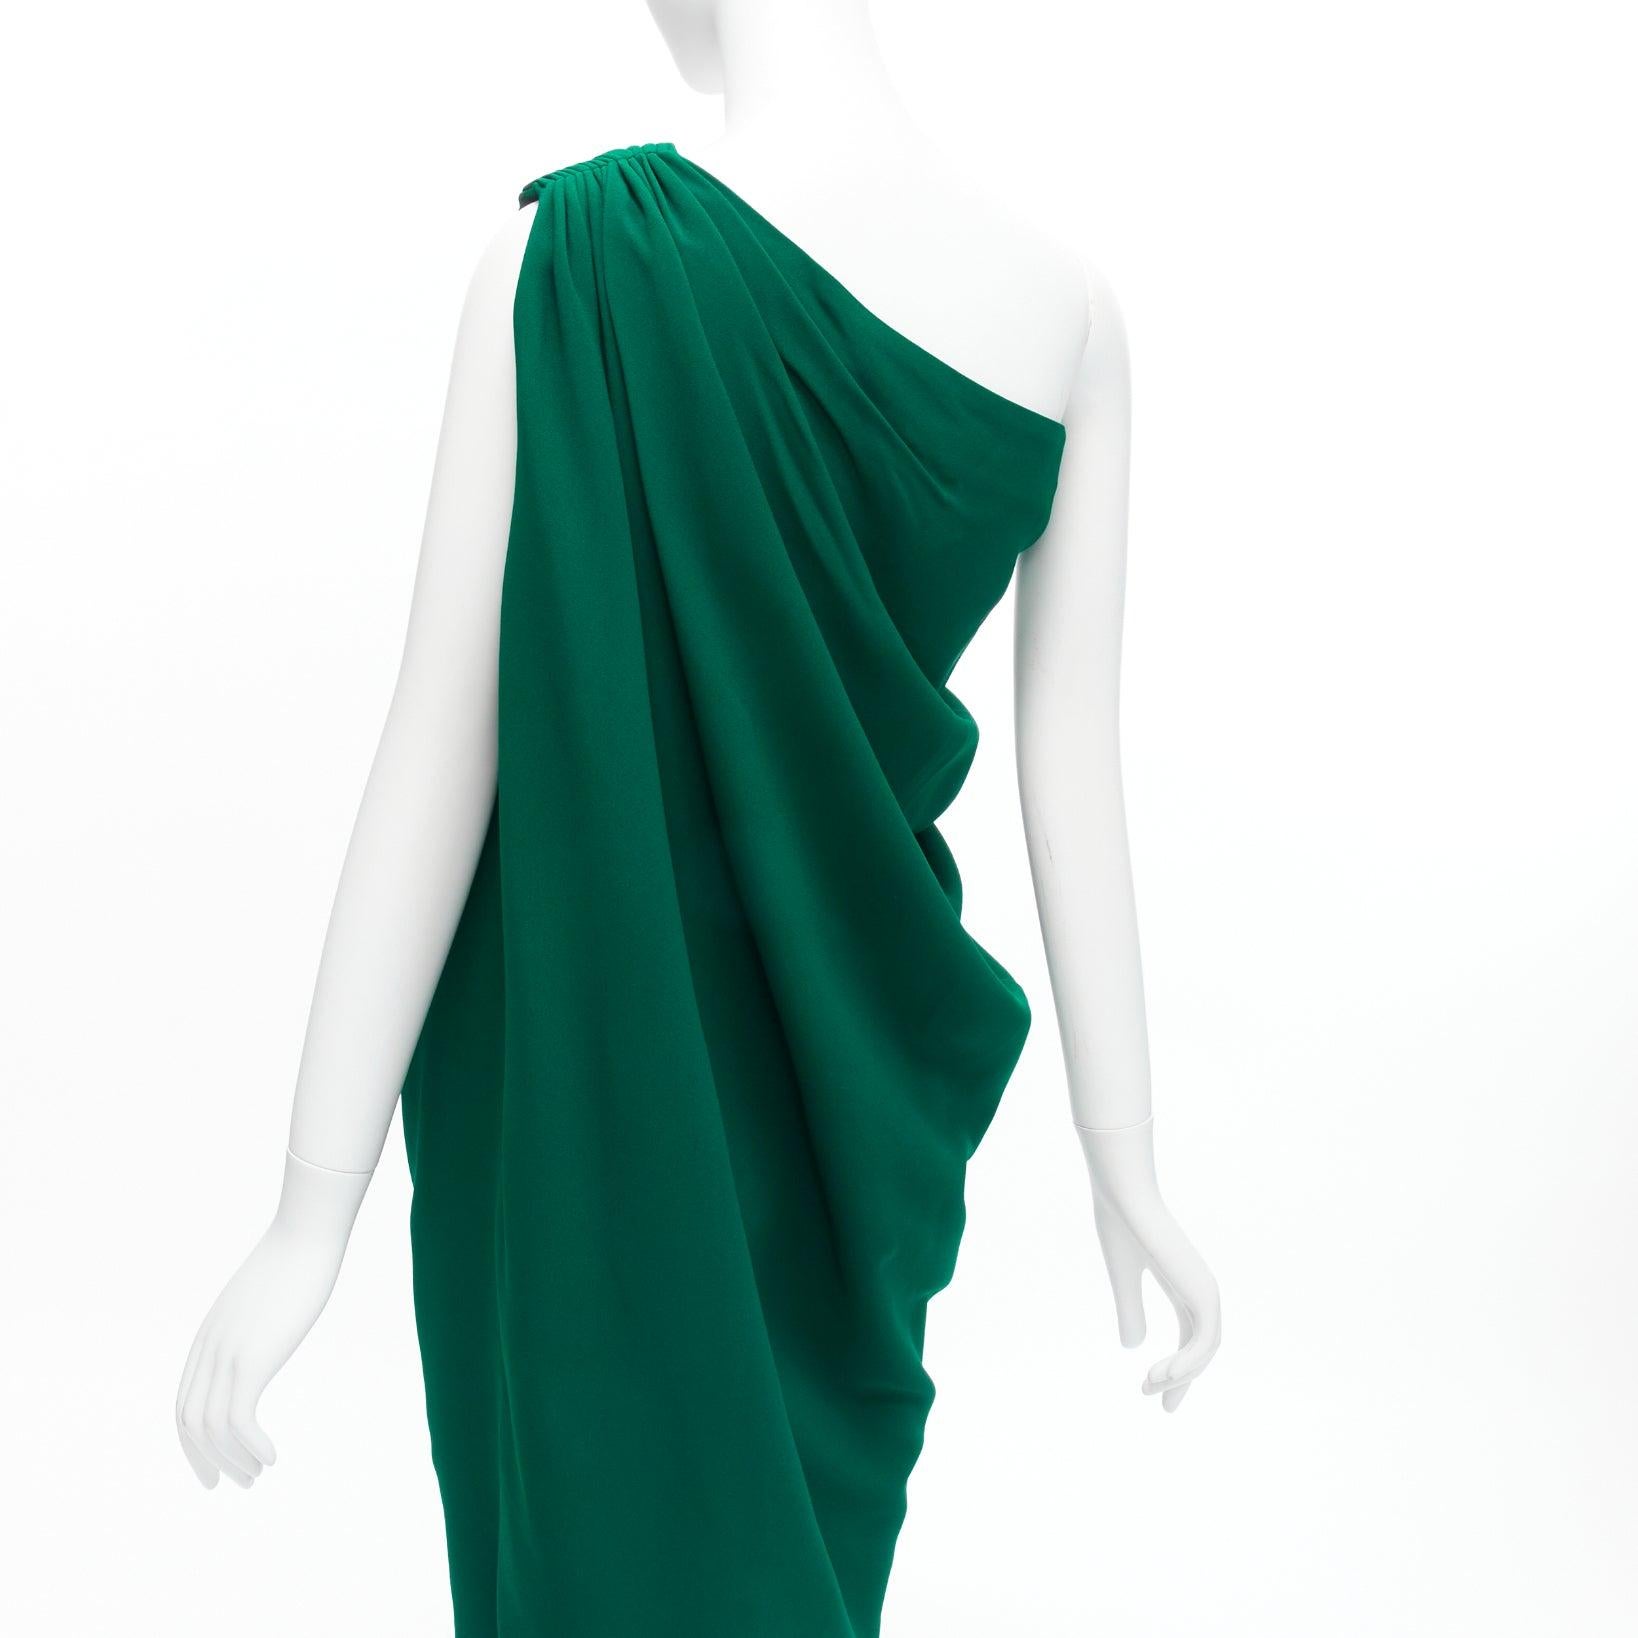 LANVIN 2014 forest green crepe asymmetric drape one shoulder cocktail dress FR36 S
Reference: SNKO/A00278
Brand: Lanvin
Designer: Alber Elbaz
Collection: 2014
Material: Acetate, Viscose
Color: Green
Pattern: Solid
Closure: Pullover
Made in: